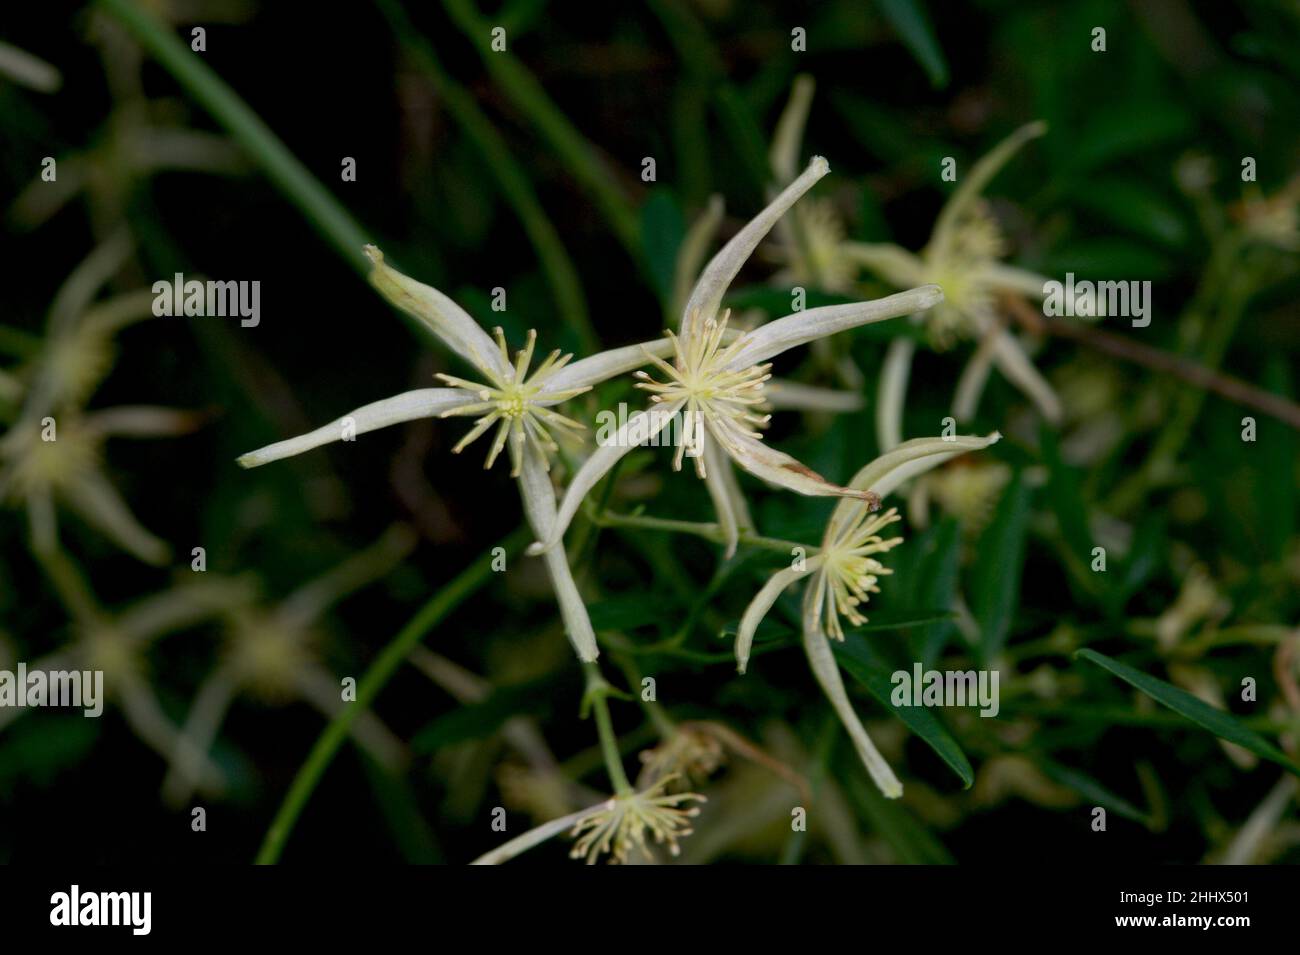 Australia has just one species of Clematis - Clematis Aristata, also known as Old Man's Beard, from the fluffy seed heads. Found at Blackburn Lake. Stock Photo